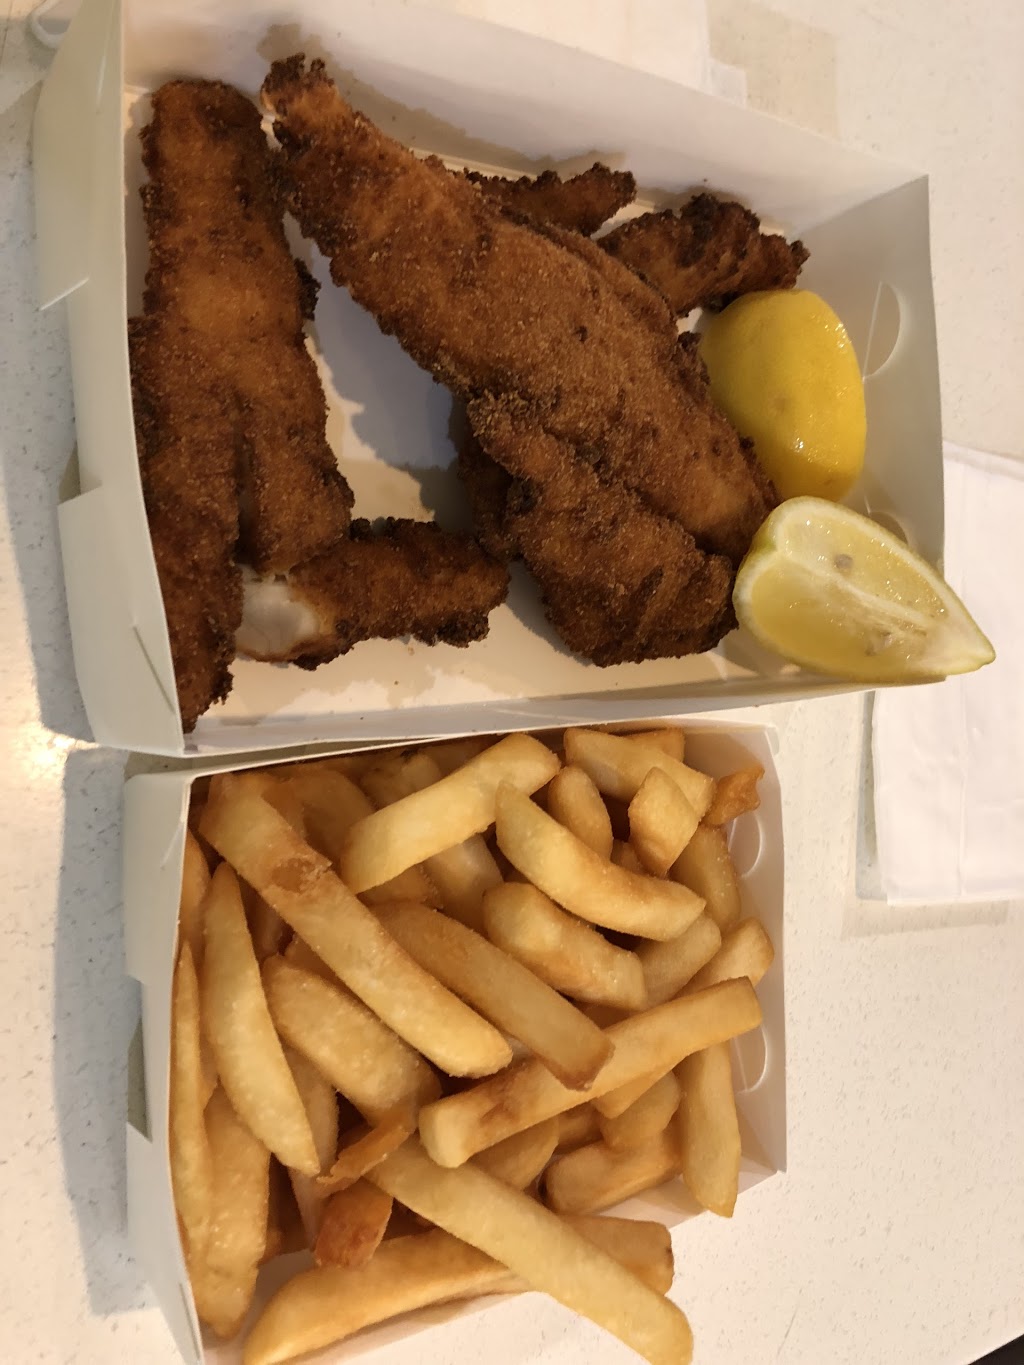 Olde Fashioned Fish & Chips | 2/286-288 Willoughby Rd, Naremburn NSW 2065, Australia | Phone: (02) 9438 4260